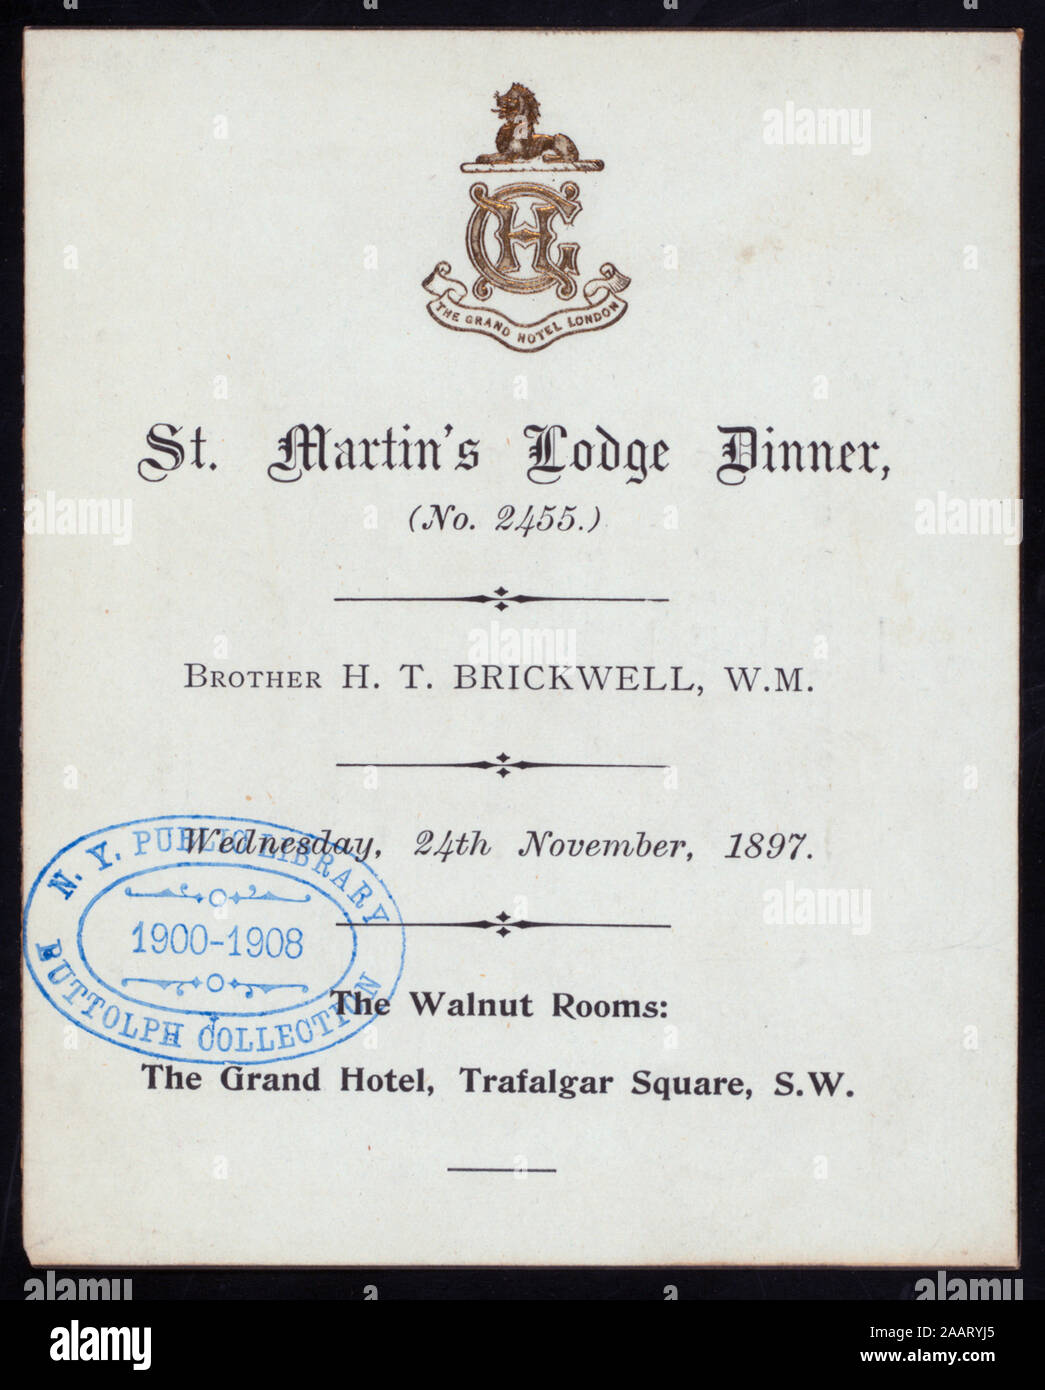 Dinner Held By St Martin S Lodge No2455 At Walnut Rooms